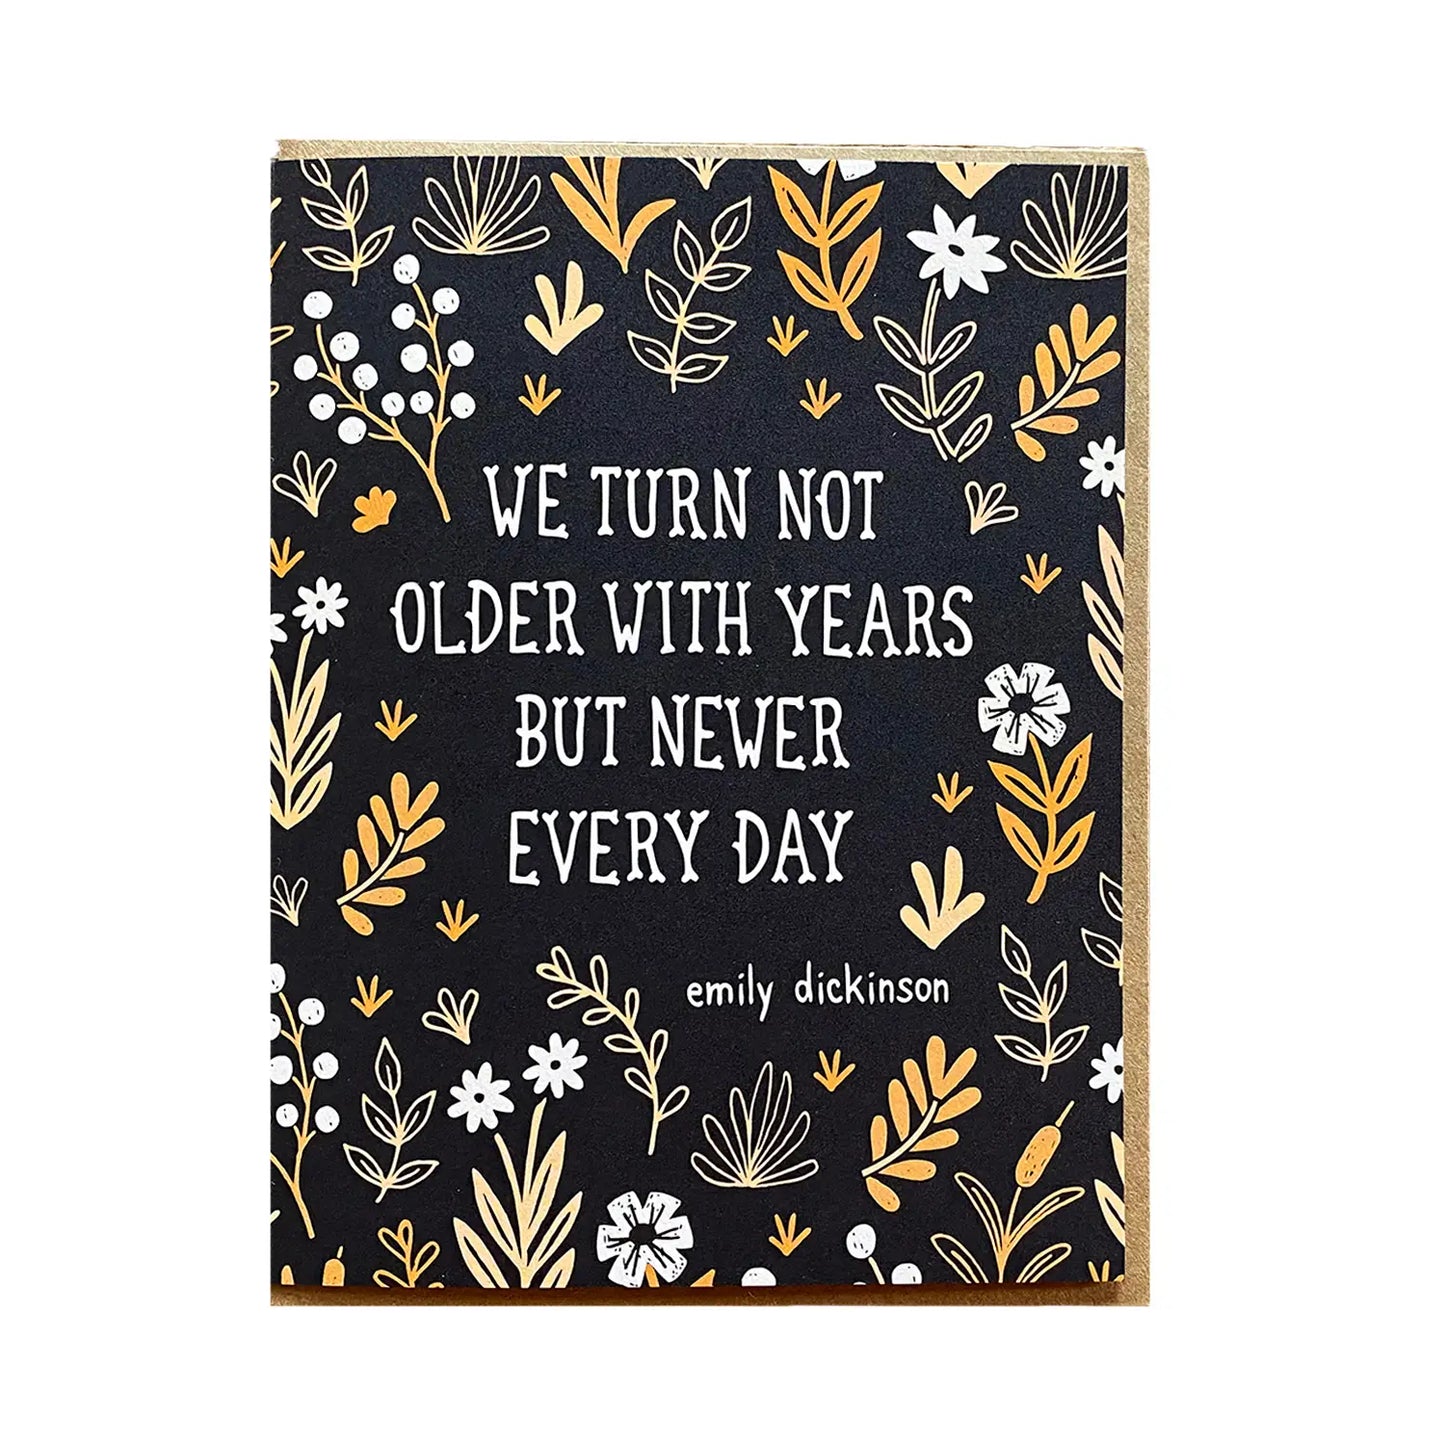 White card with black background and white and yellow flowers and plants. White text reads "we turn not older with years but newer every day -Emily Dickinson"